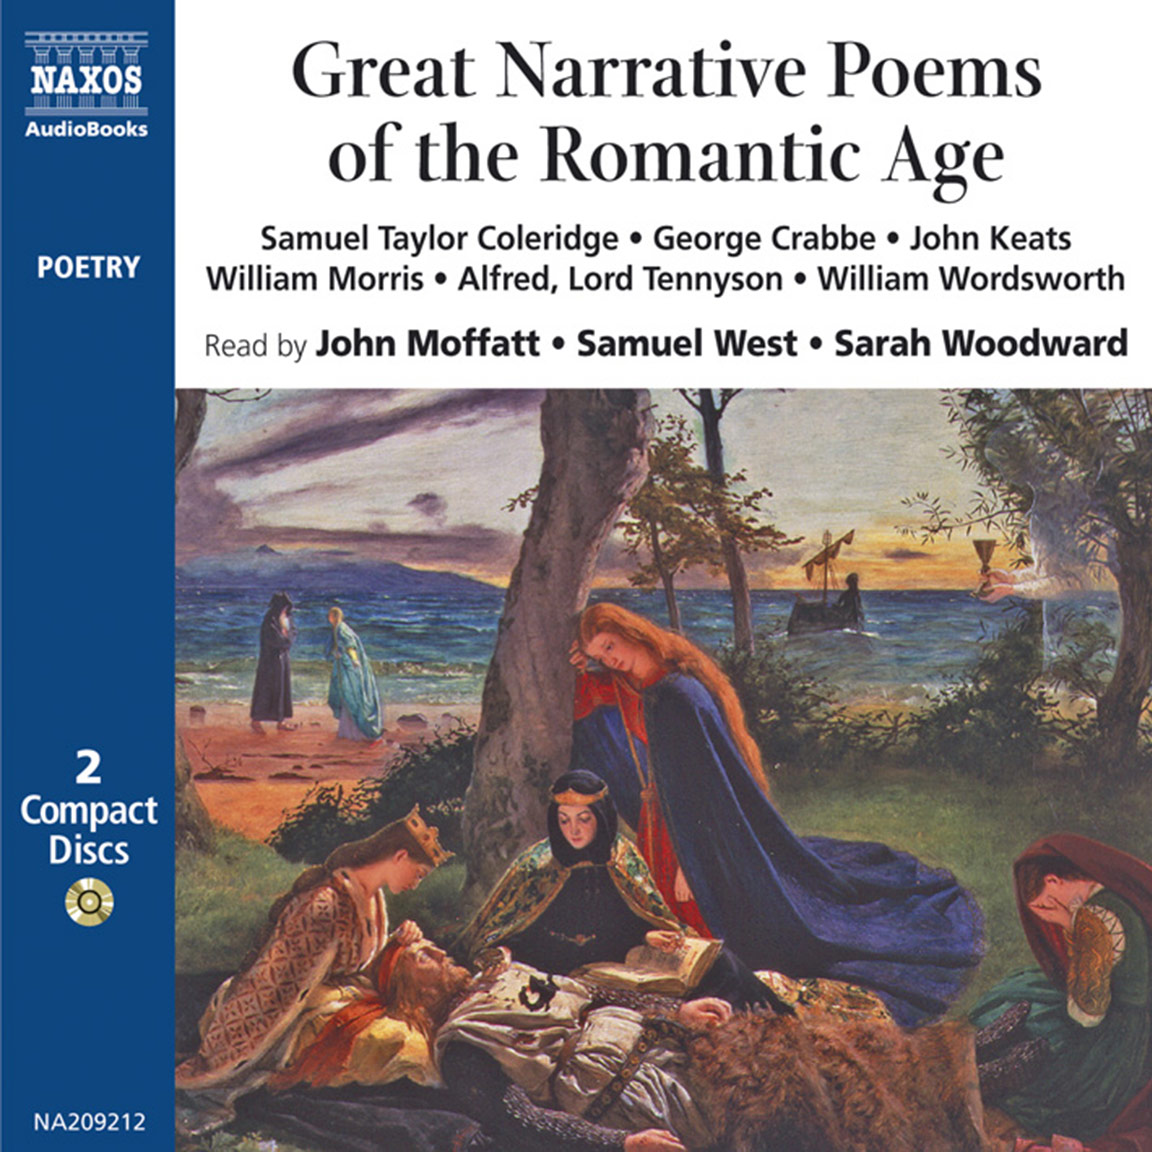 Great Narrative Poems of the Romantic Age (compilation)